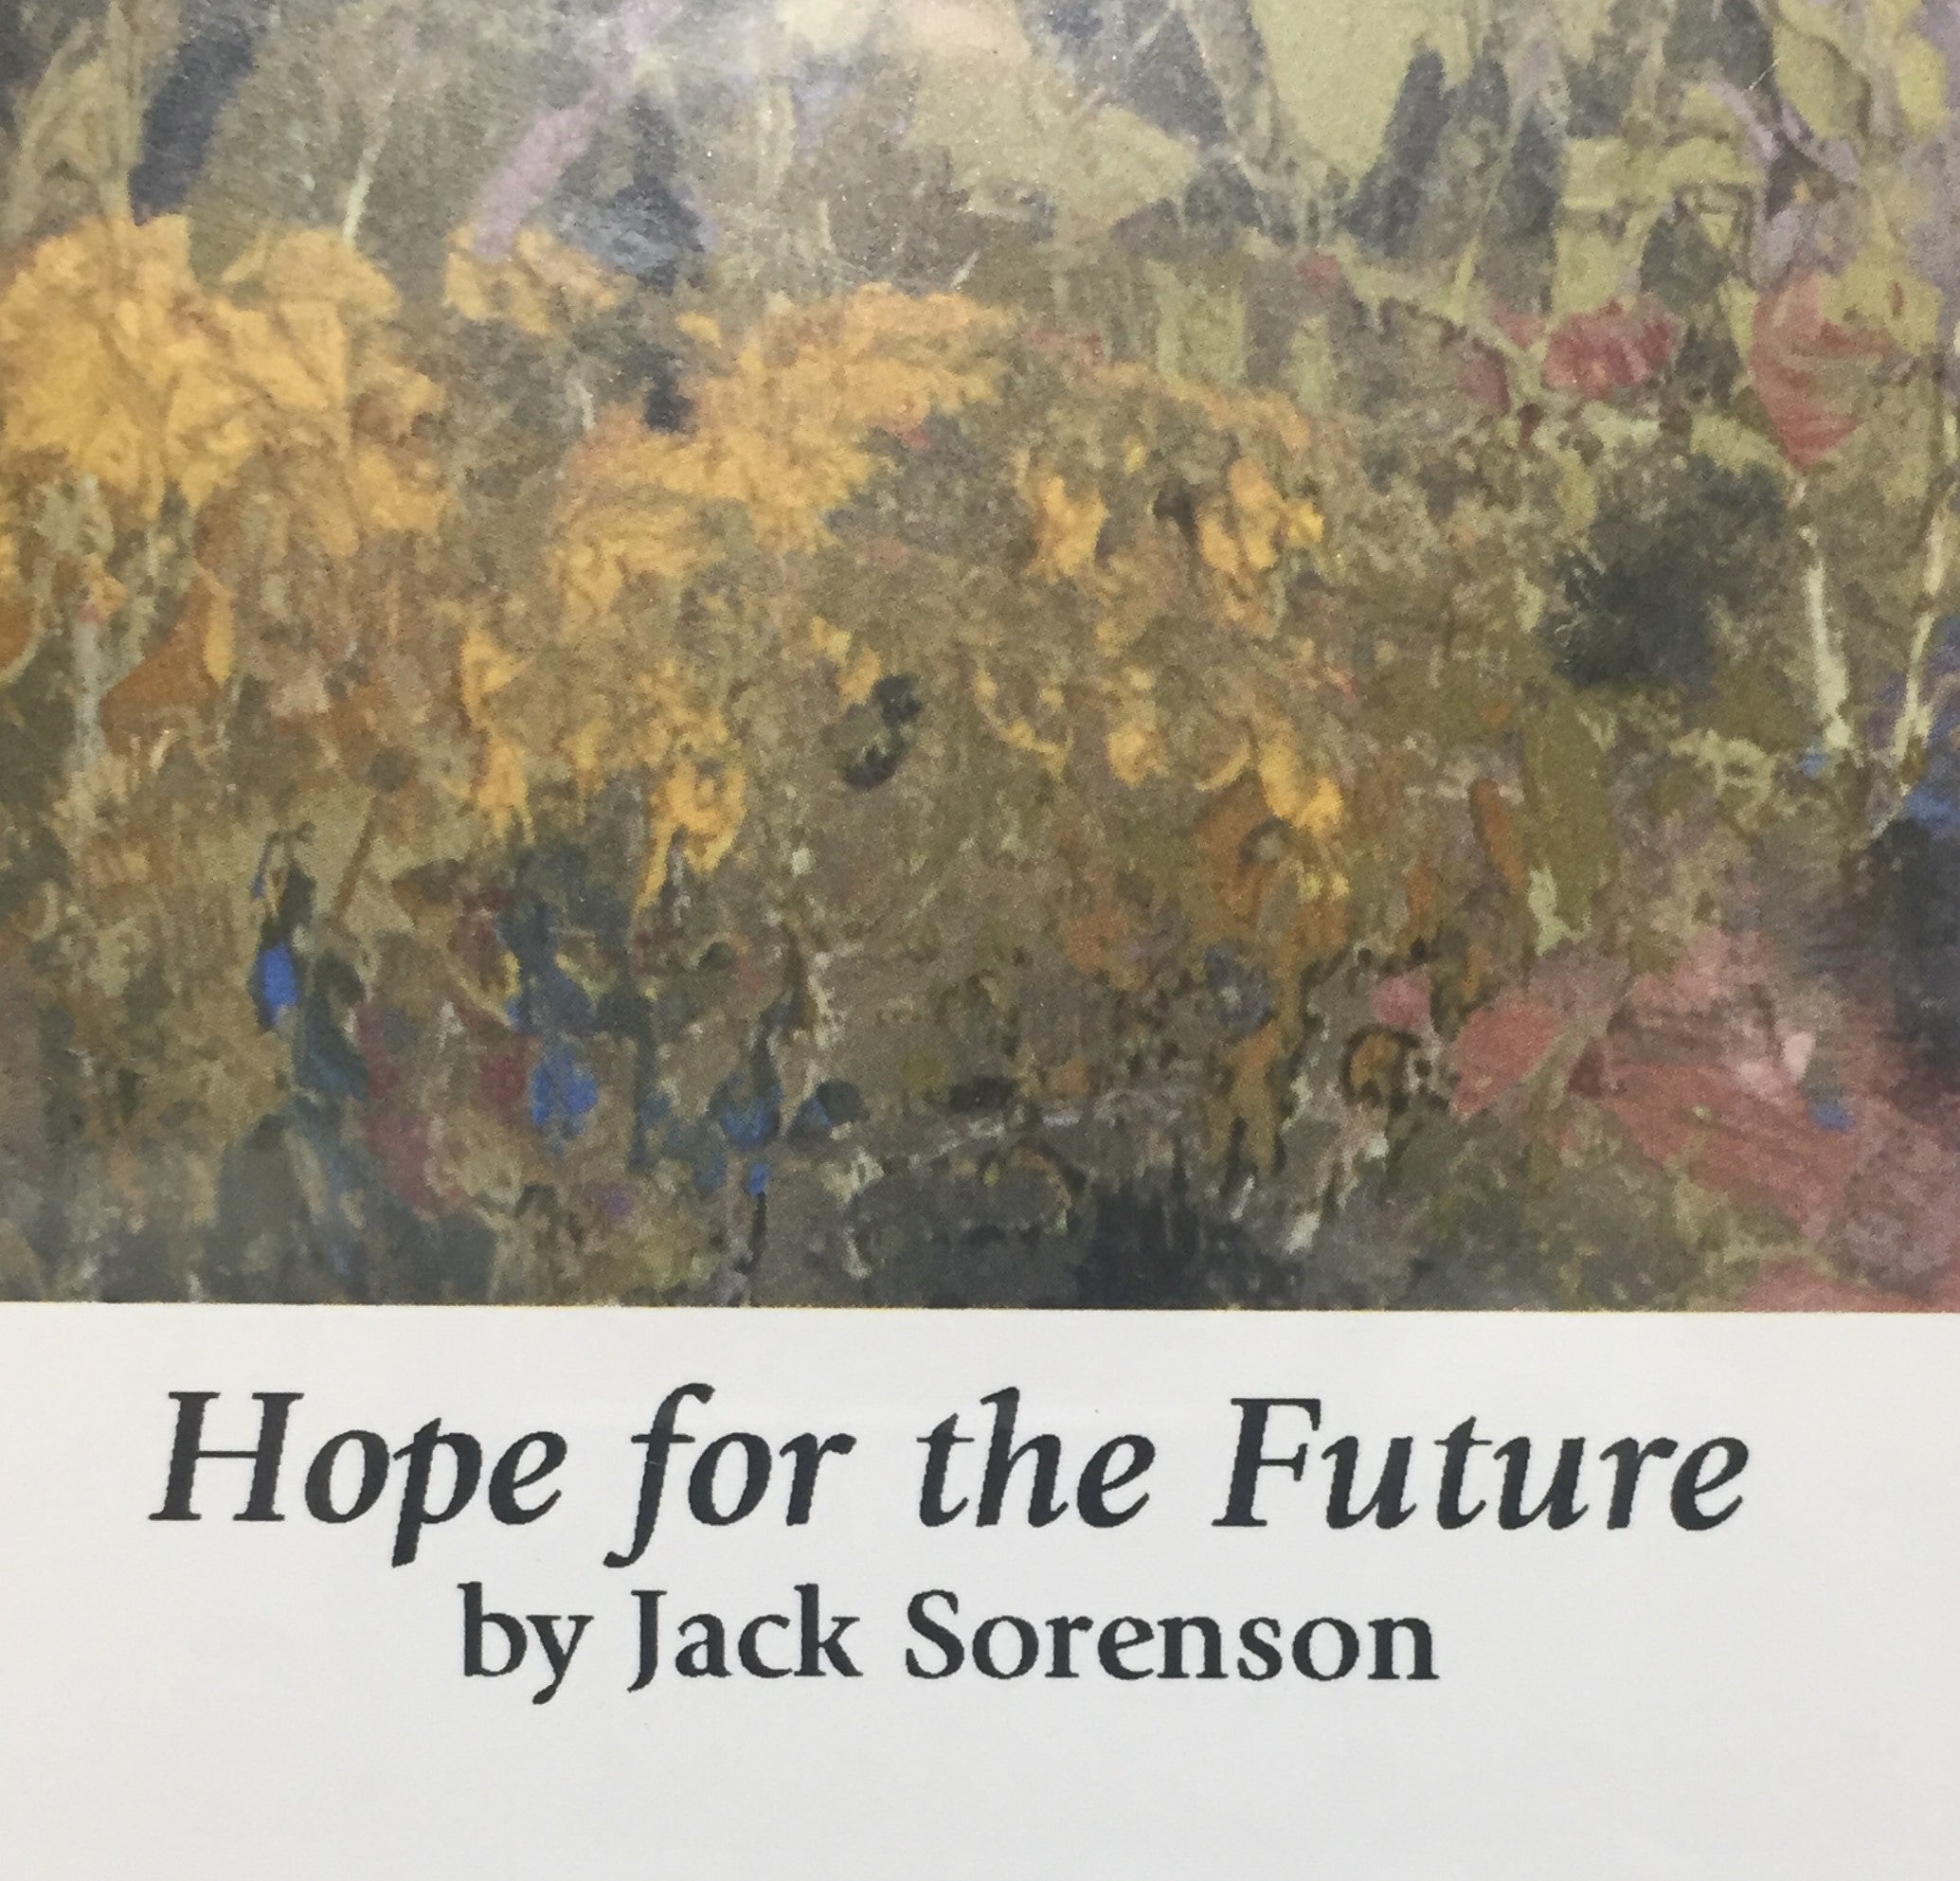 "Hope for the Future" - Limited Art Print by Jack Sorenson